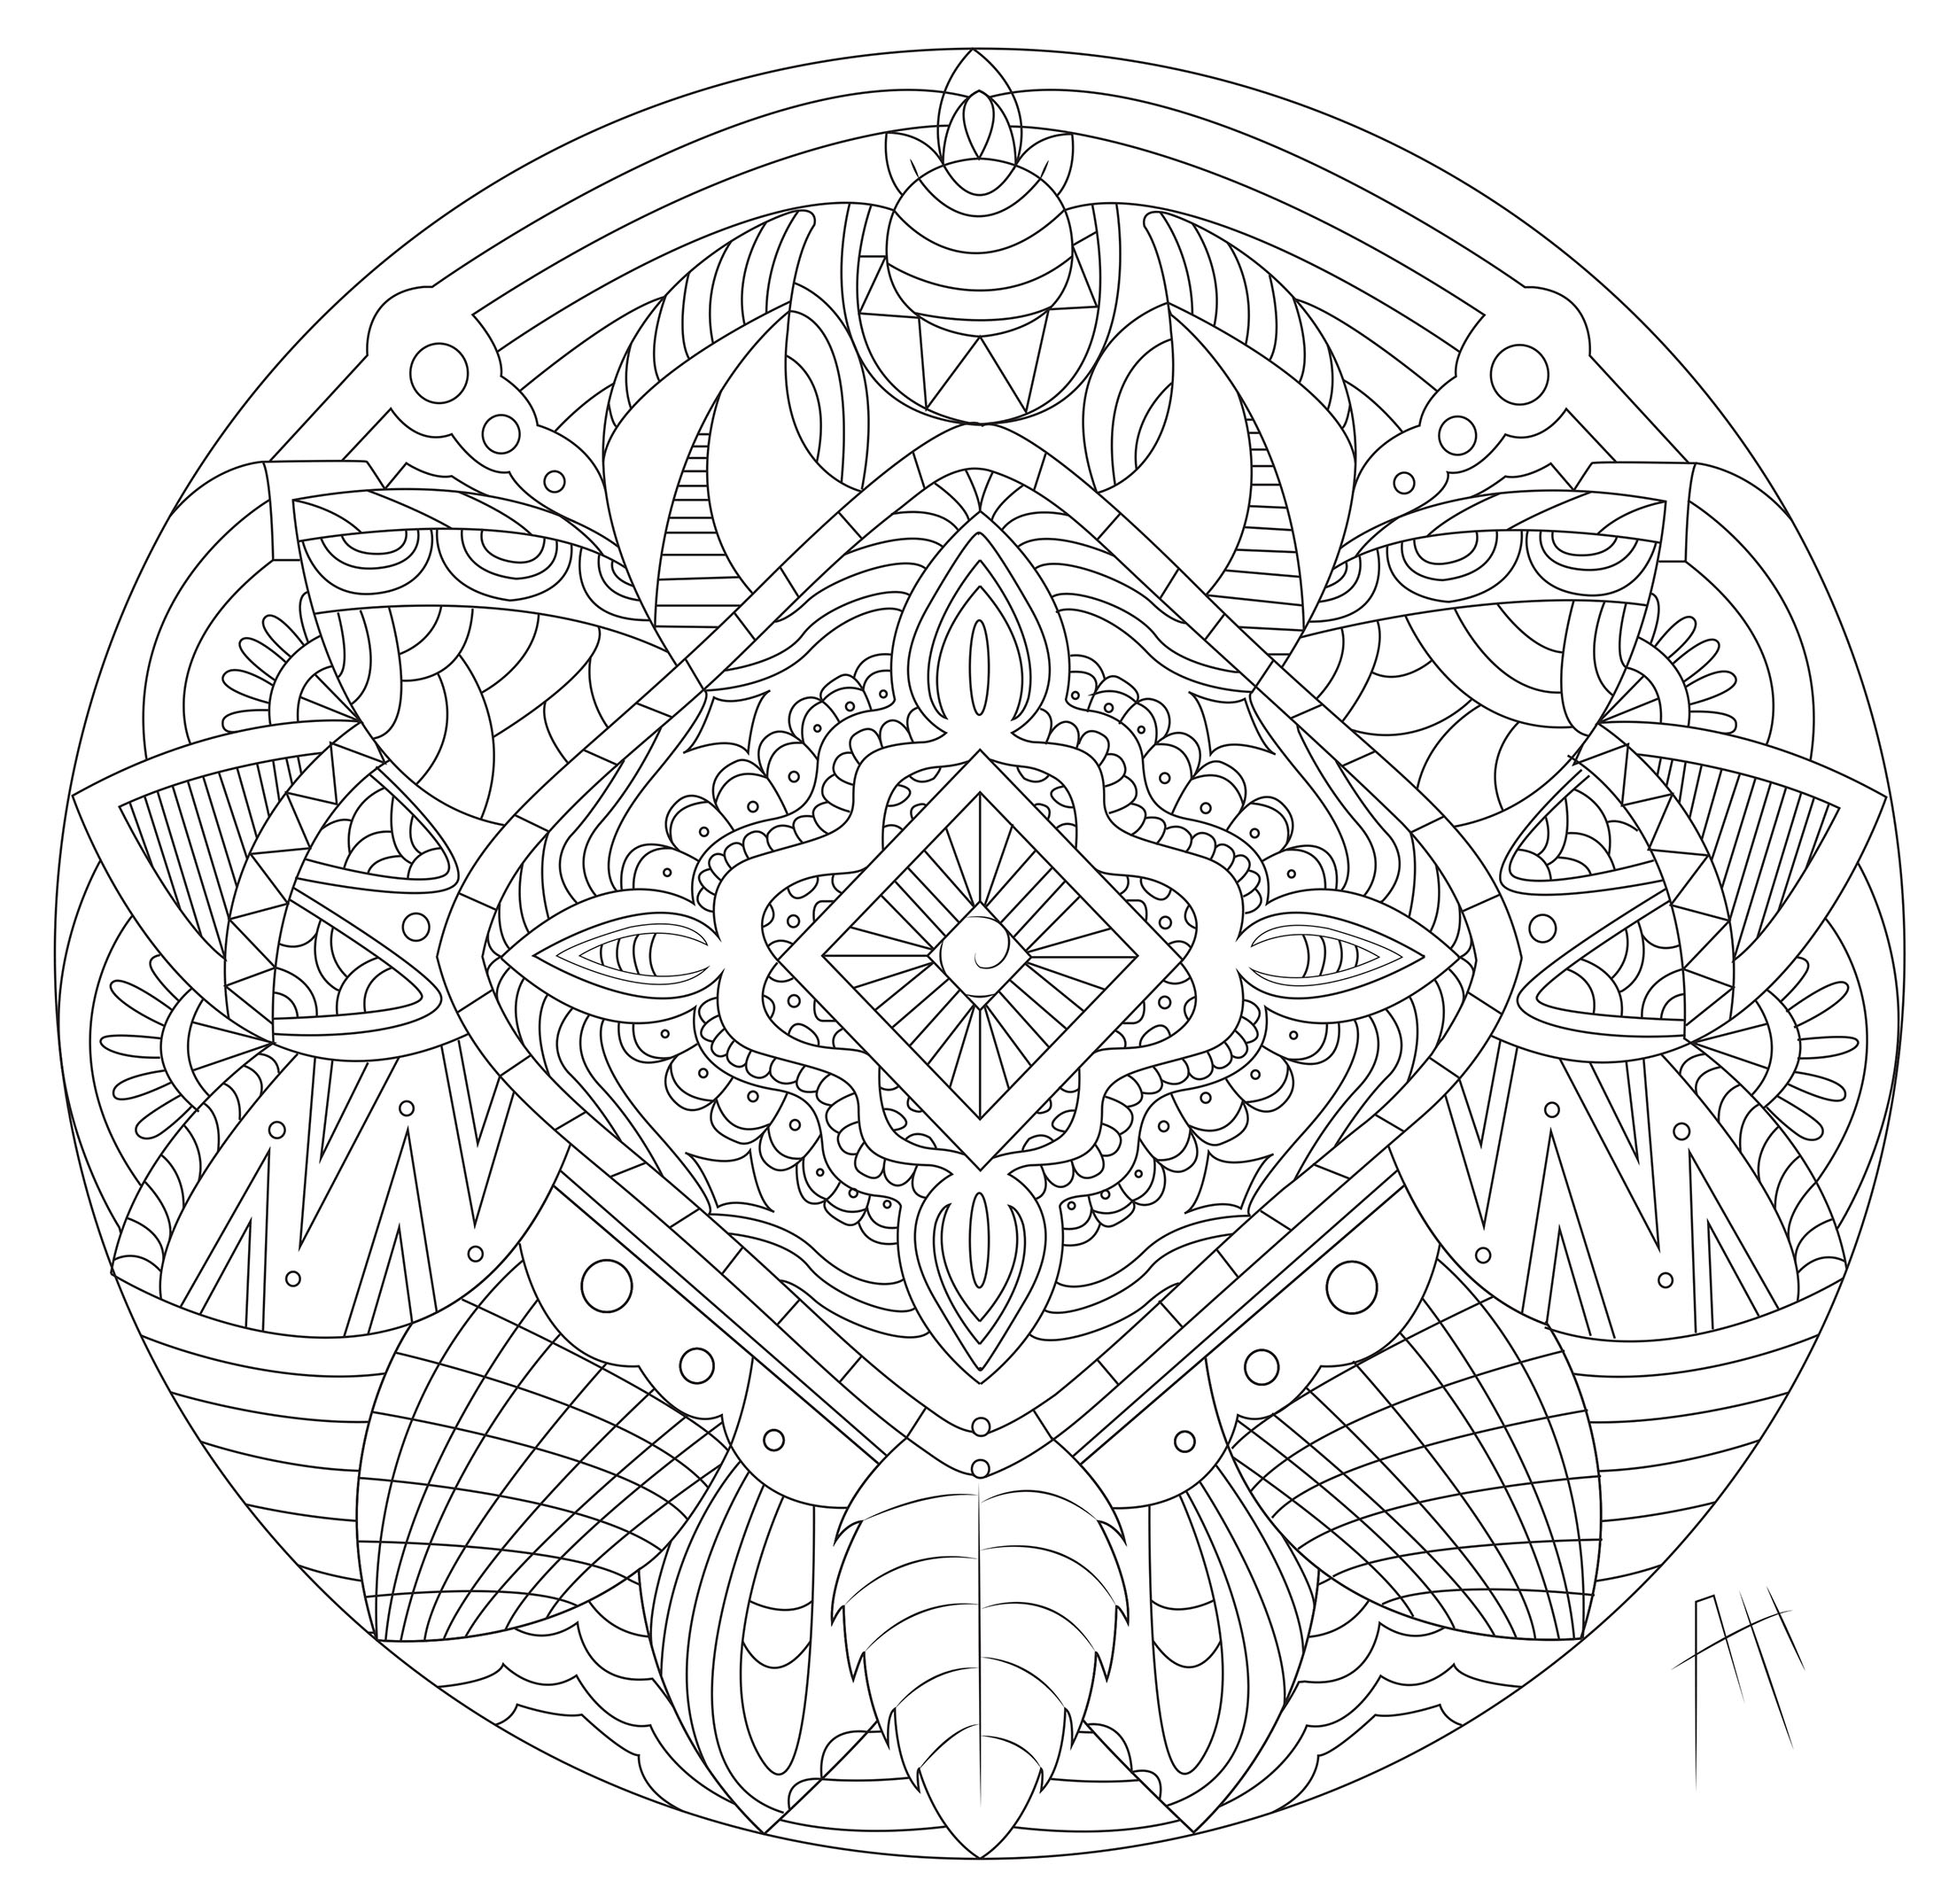 Leaves, Flowers and feathers in a beautiful Mandala, Artist : Axelle